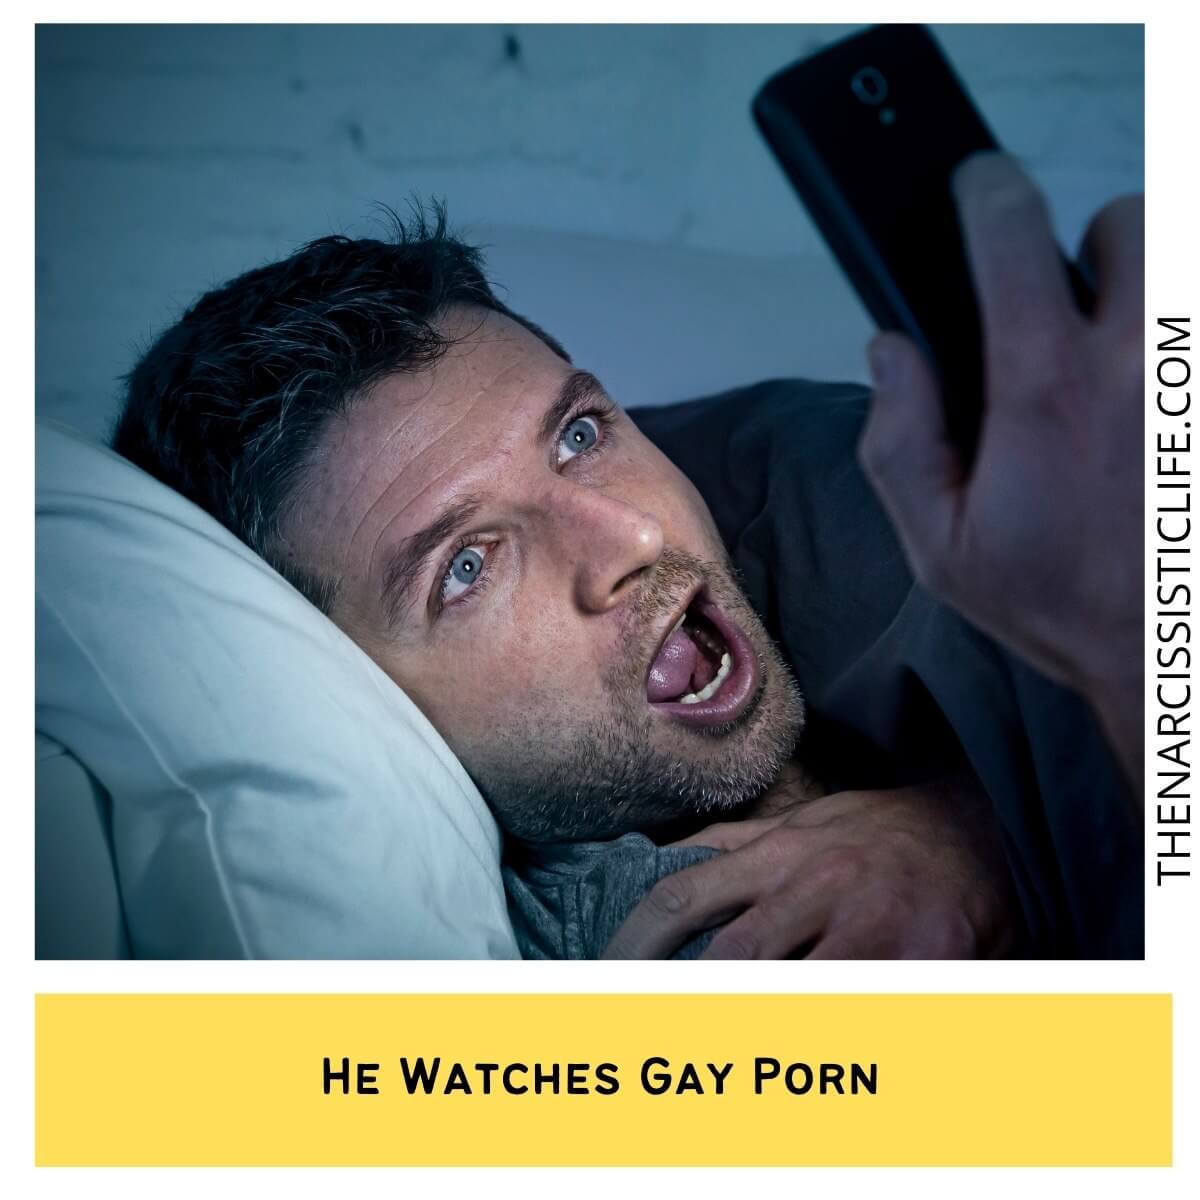 Gay Porn Straight Guys Do That - 16 Signs A Guy Is Pretending To Be Straight - The Narcissistic Life